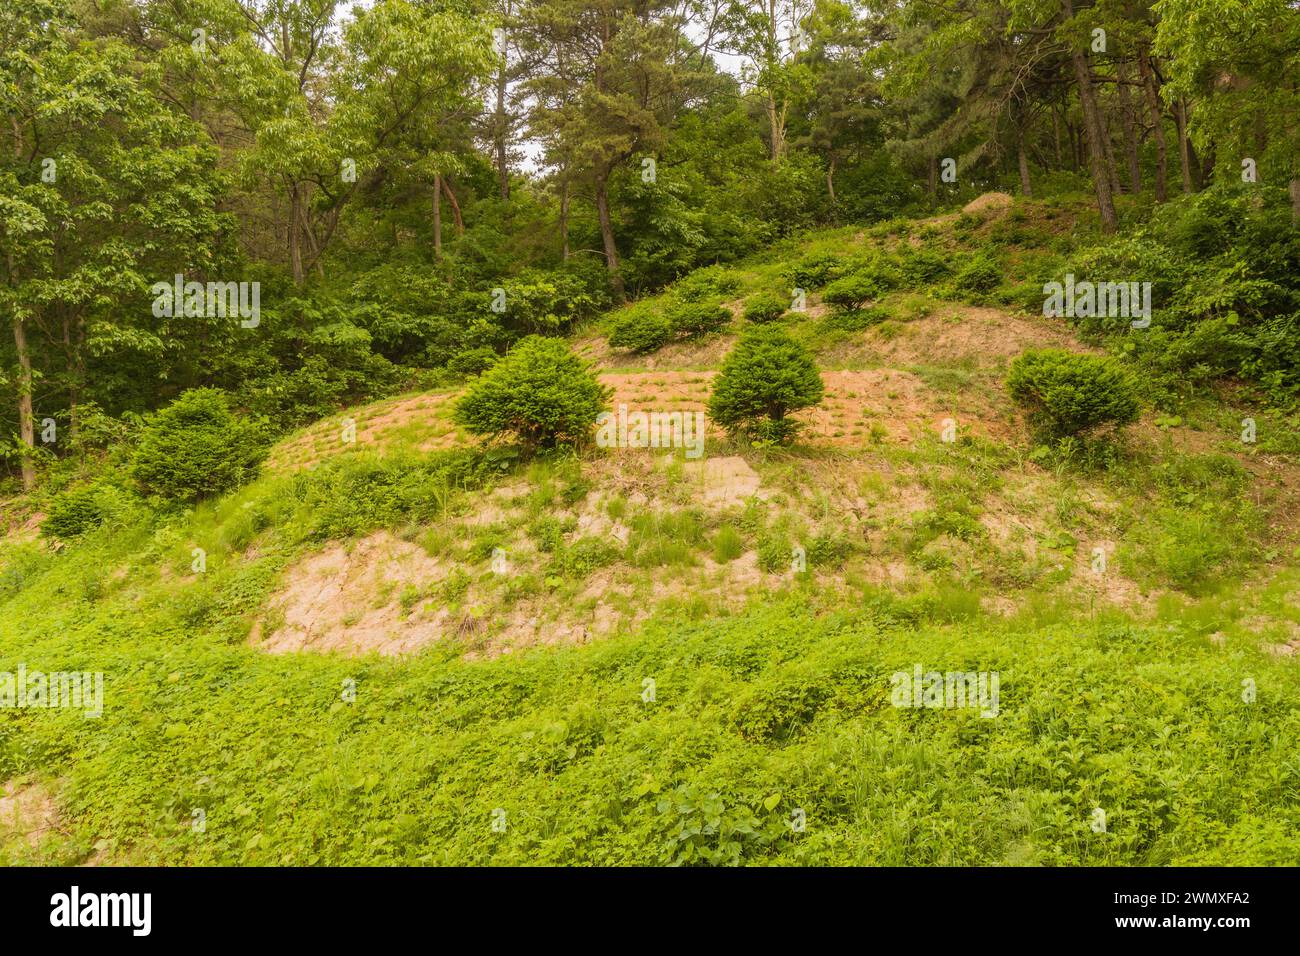 Eroded hill with sparse coniferous trees and undergrowth, in Daejeon South Korea Stock Photo